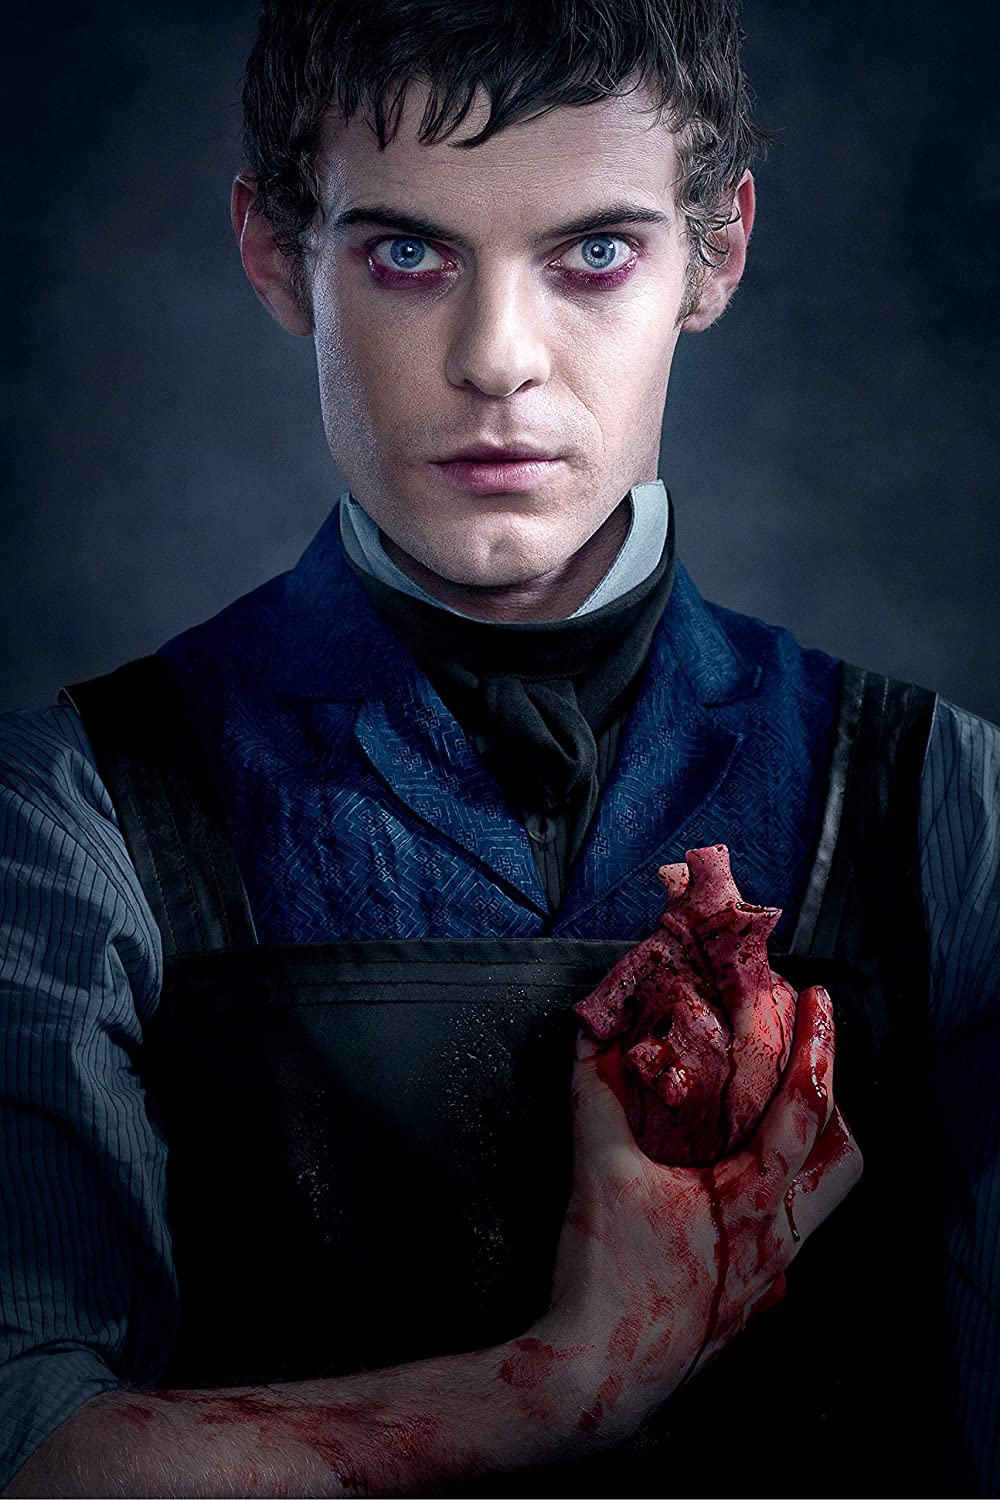 Victor Frankenstein Poster Wall Decor Wall Print Wallpaper Penny Dreadful Home Decor Wall Accessories: Handmade